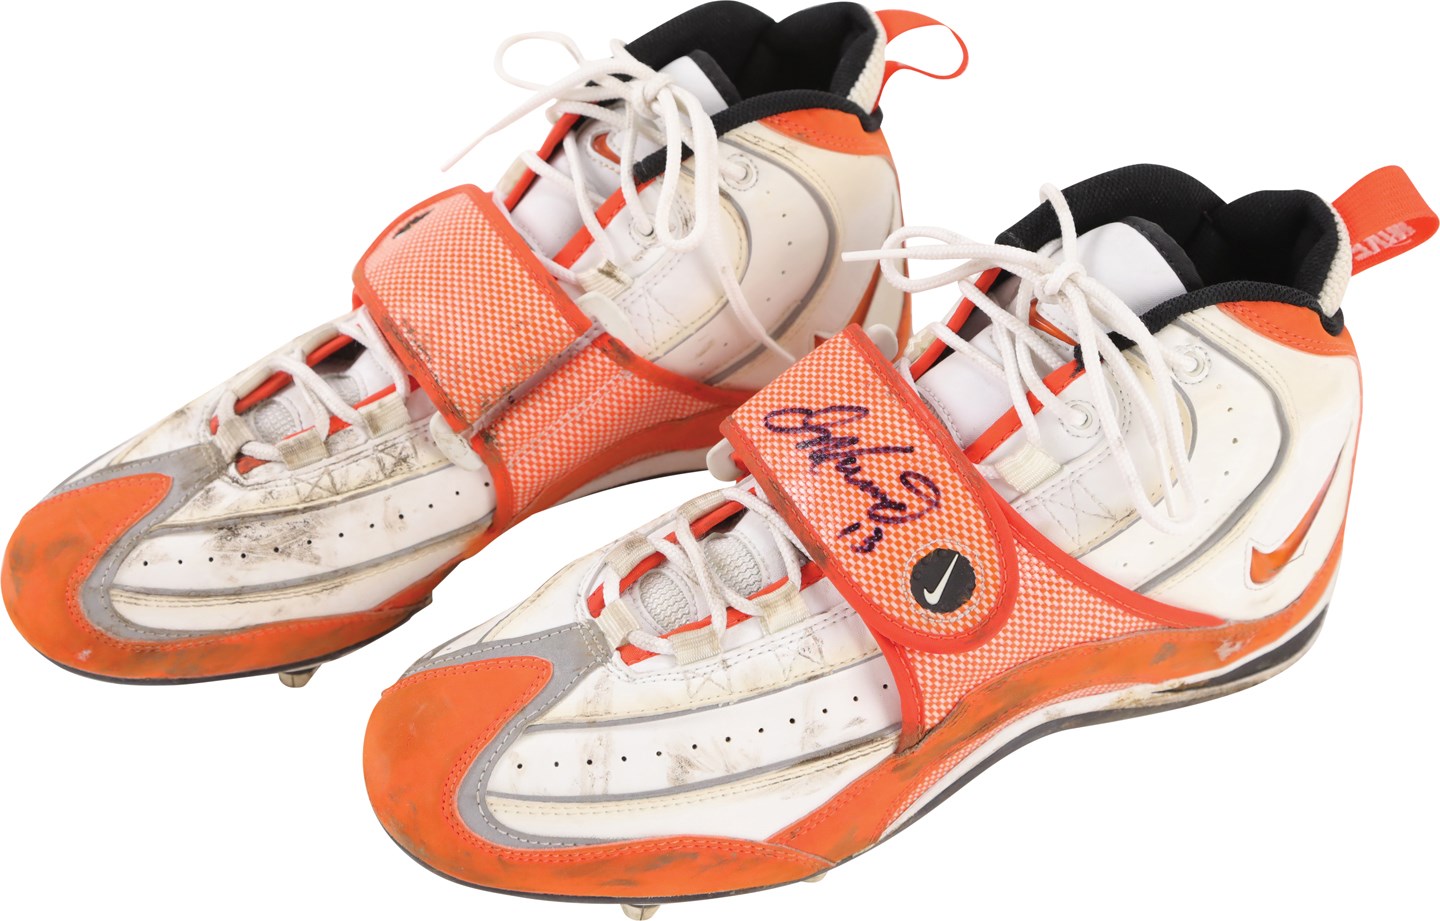 - Dan Marino Miami Dolphins Signed Game Worn Cleats (PSA)